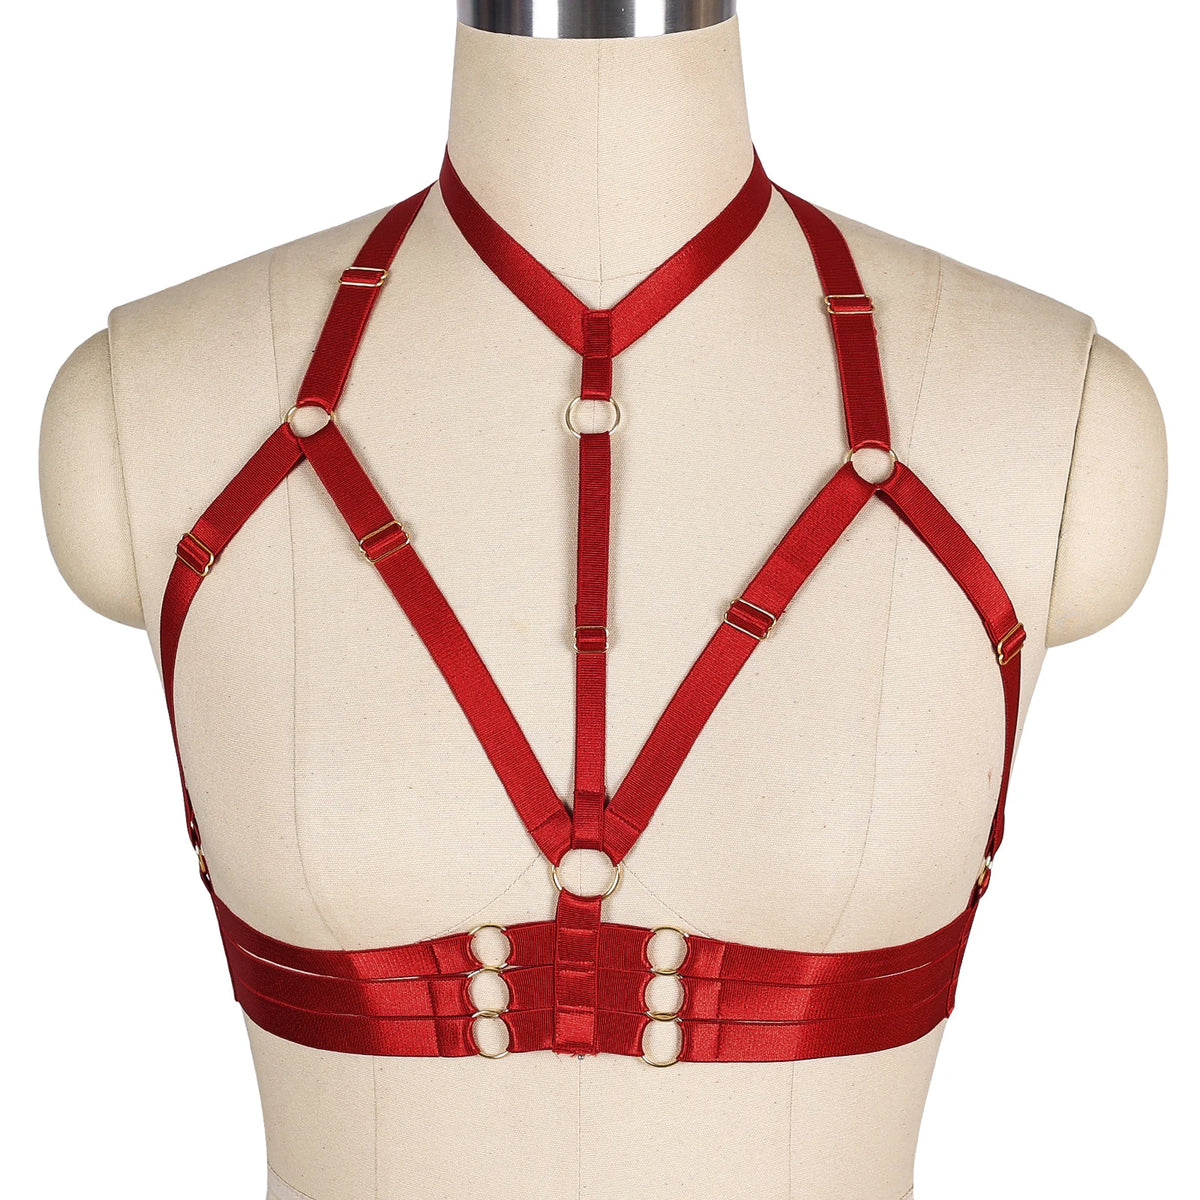 NUVO 5-Strap Sissy Harness - Lingerie - Twisted Jezebel